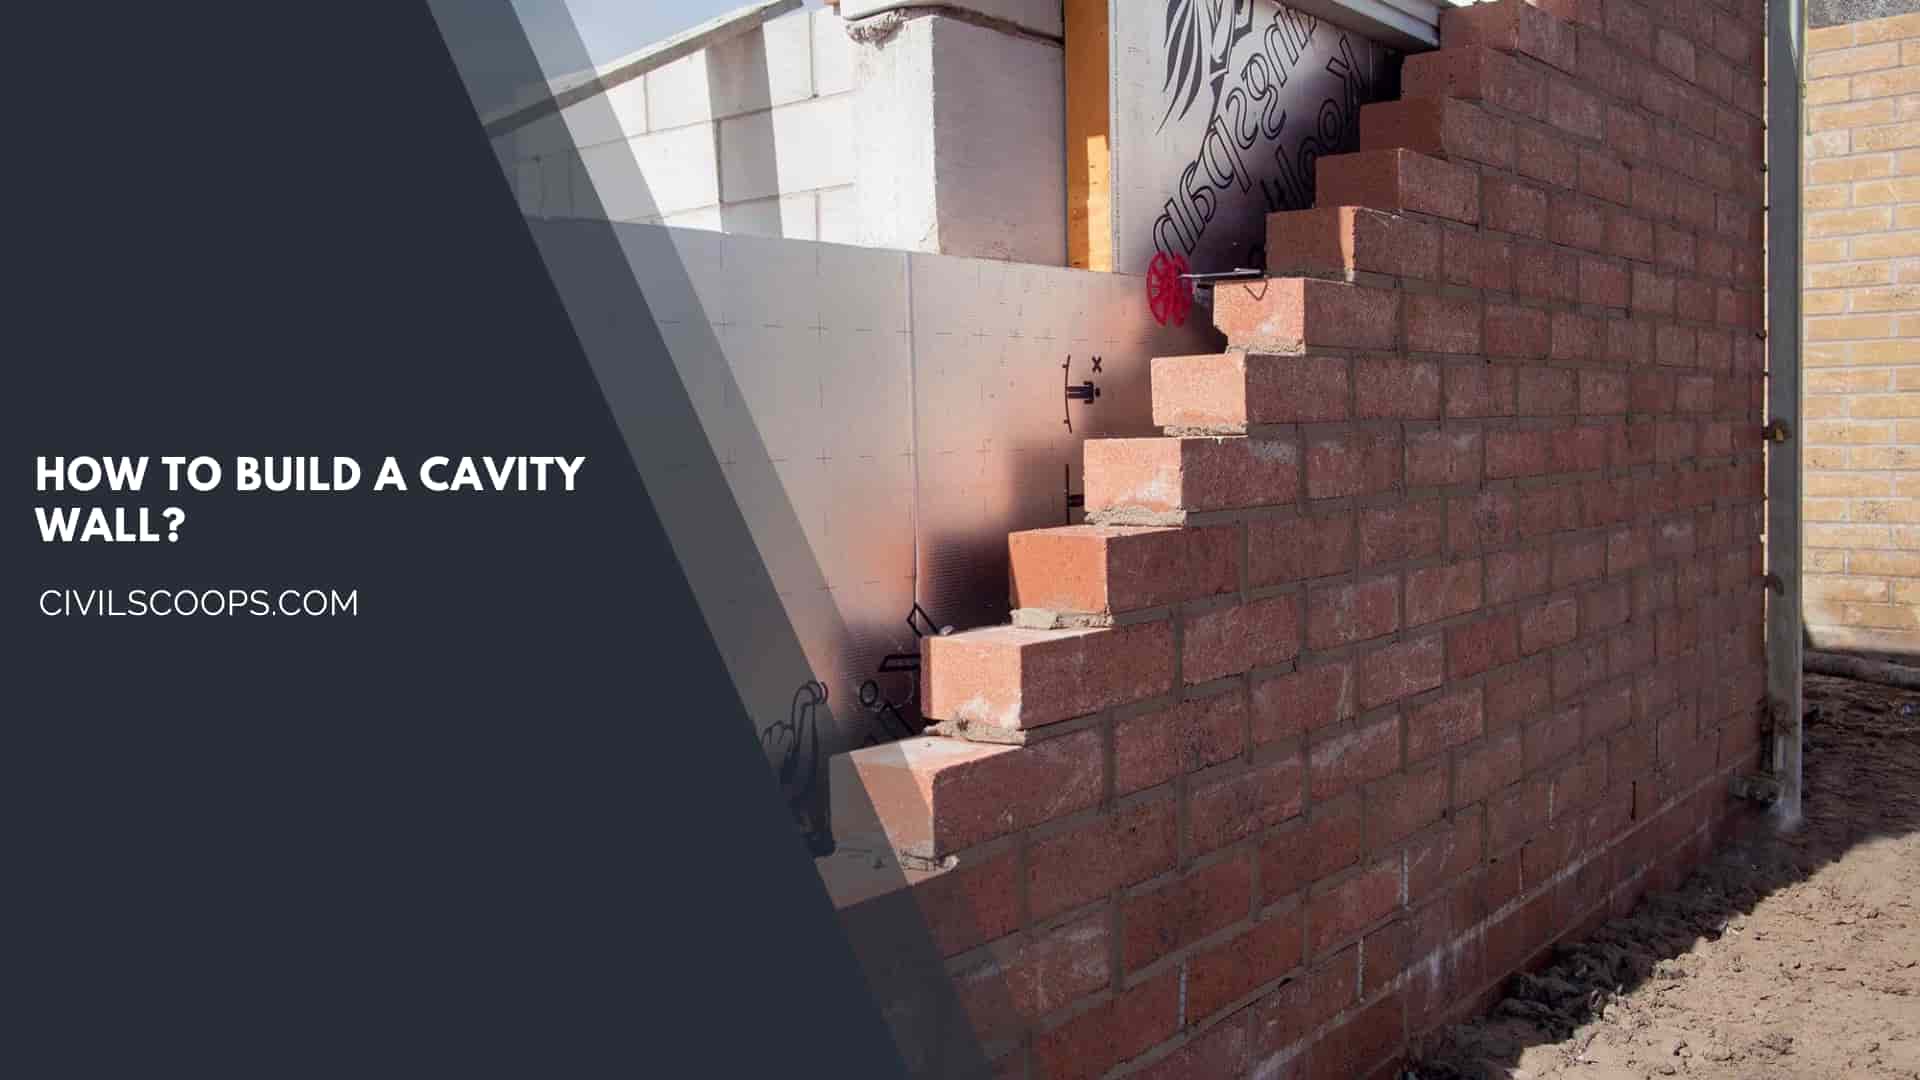 How to Build a Cavity Wall?